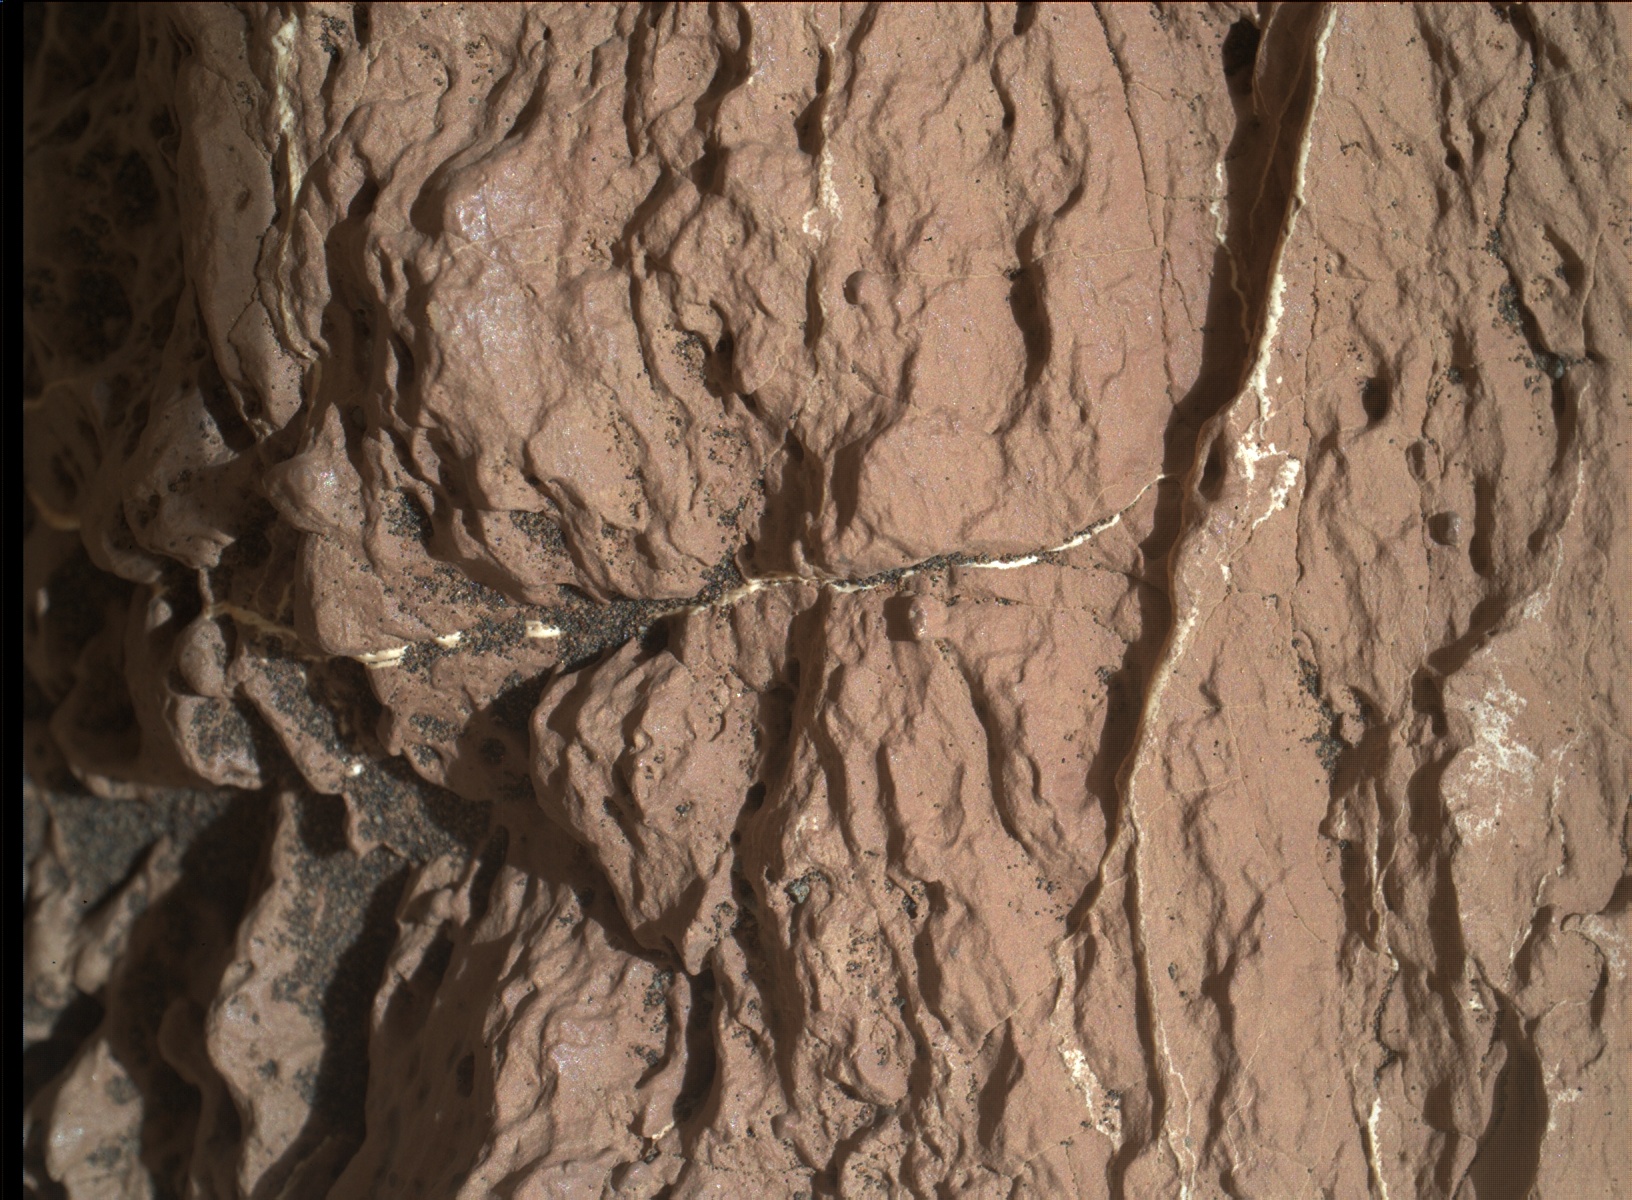 Nasa's Mars rover Curiosity acquired this image using its Mars Hand Lens Imager (MAHLI) on Sol 1585